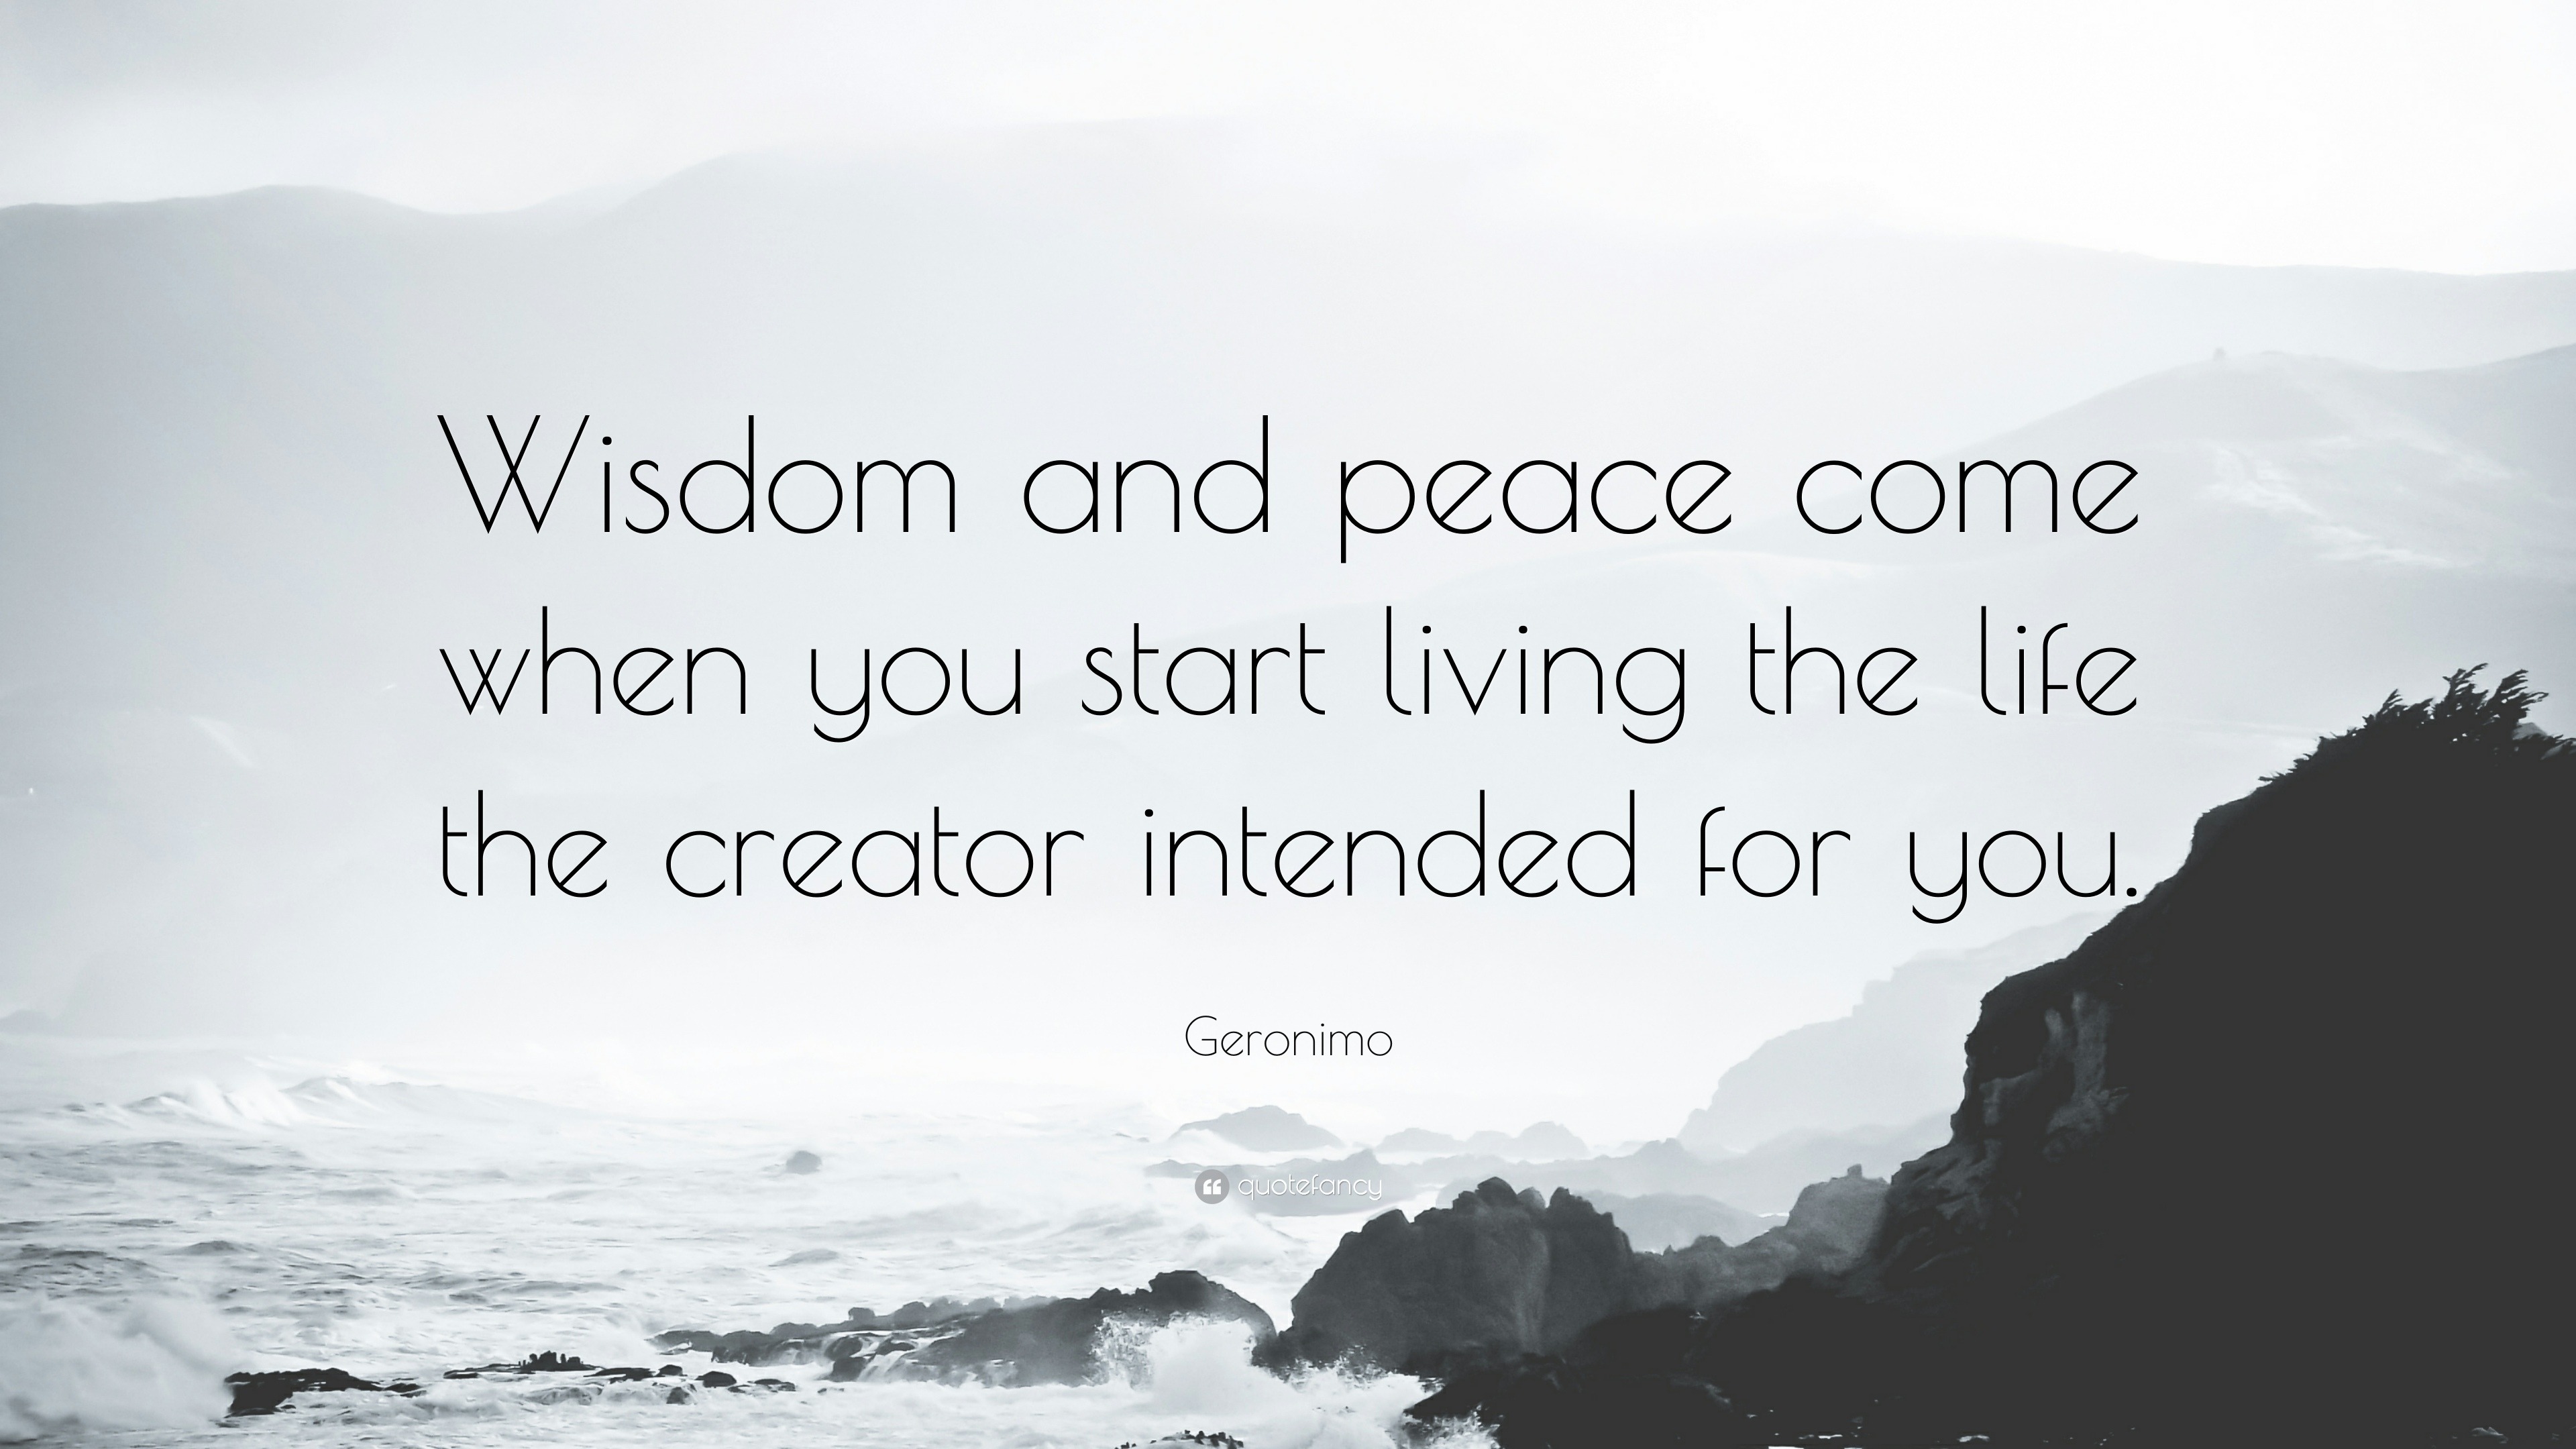 Geronimo Quote “Wisdom and peace e when you start living the life the creator